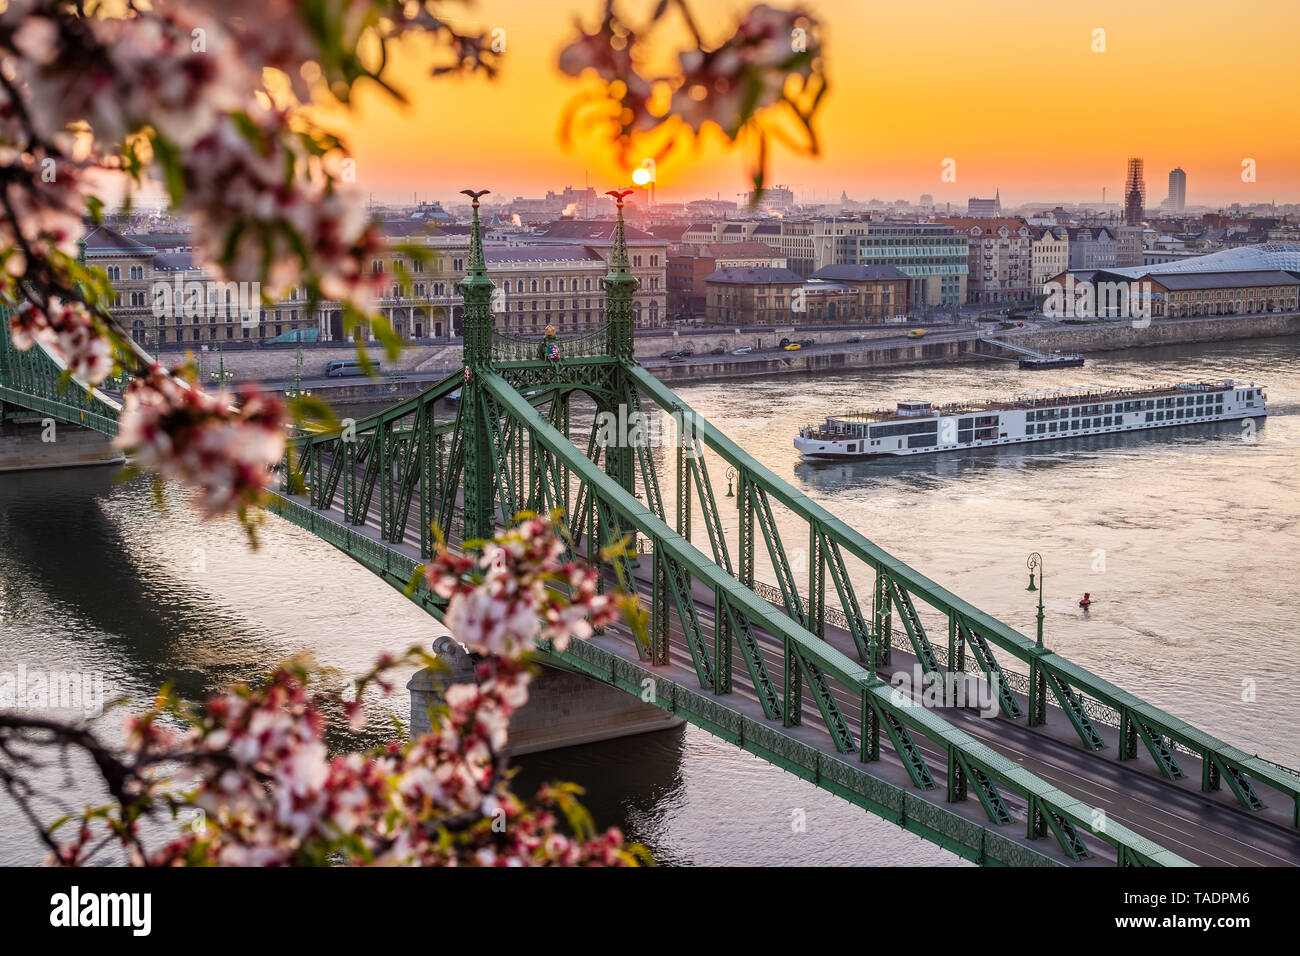 Budapest, Hungary - Beautiful spring sunrise at Liberty Bridge with cruise ship on River Danube and Cherry Blossom at foreground Stock Photo